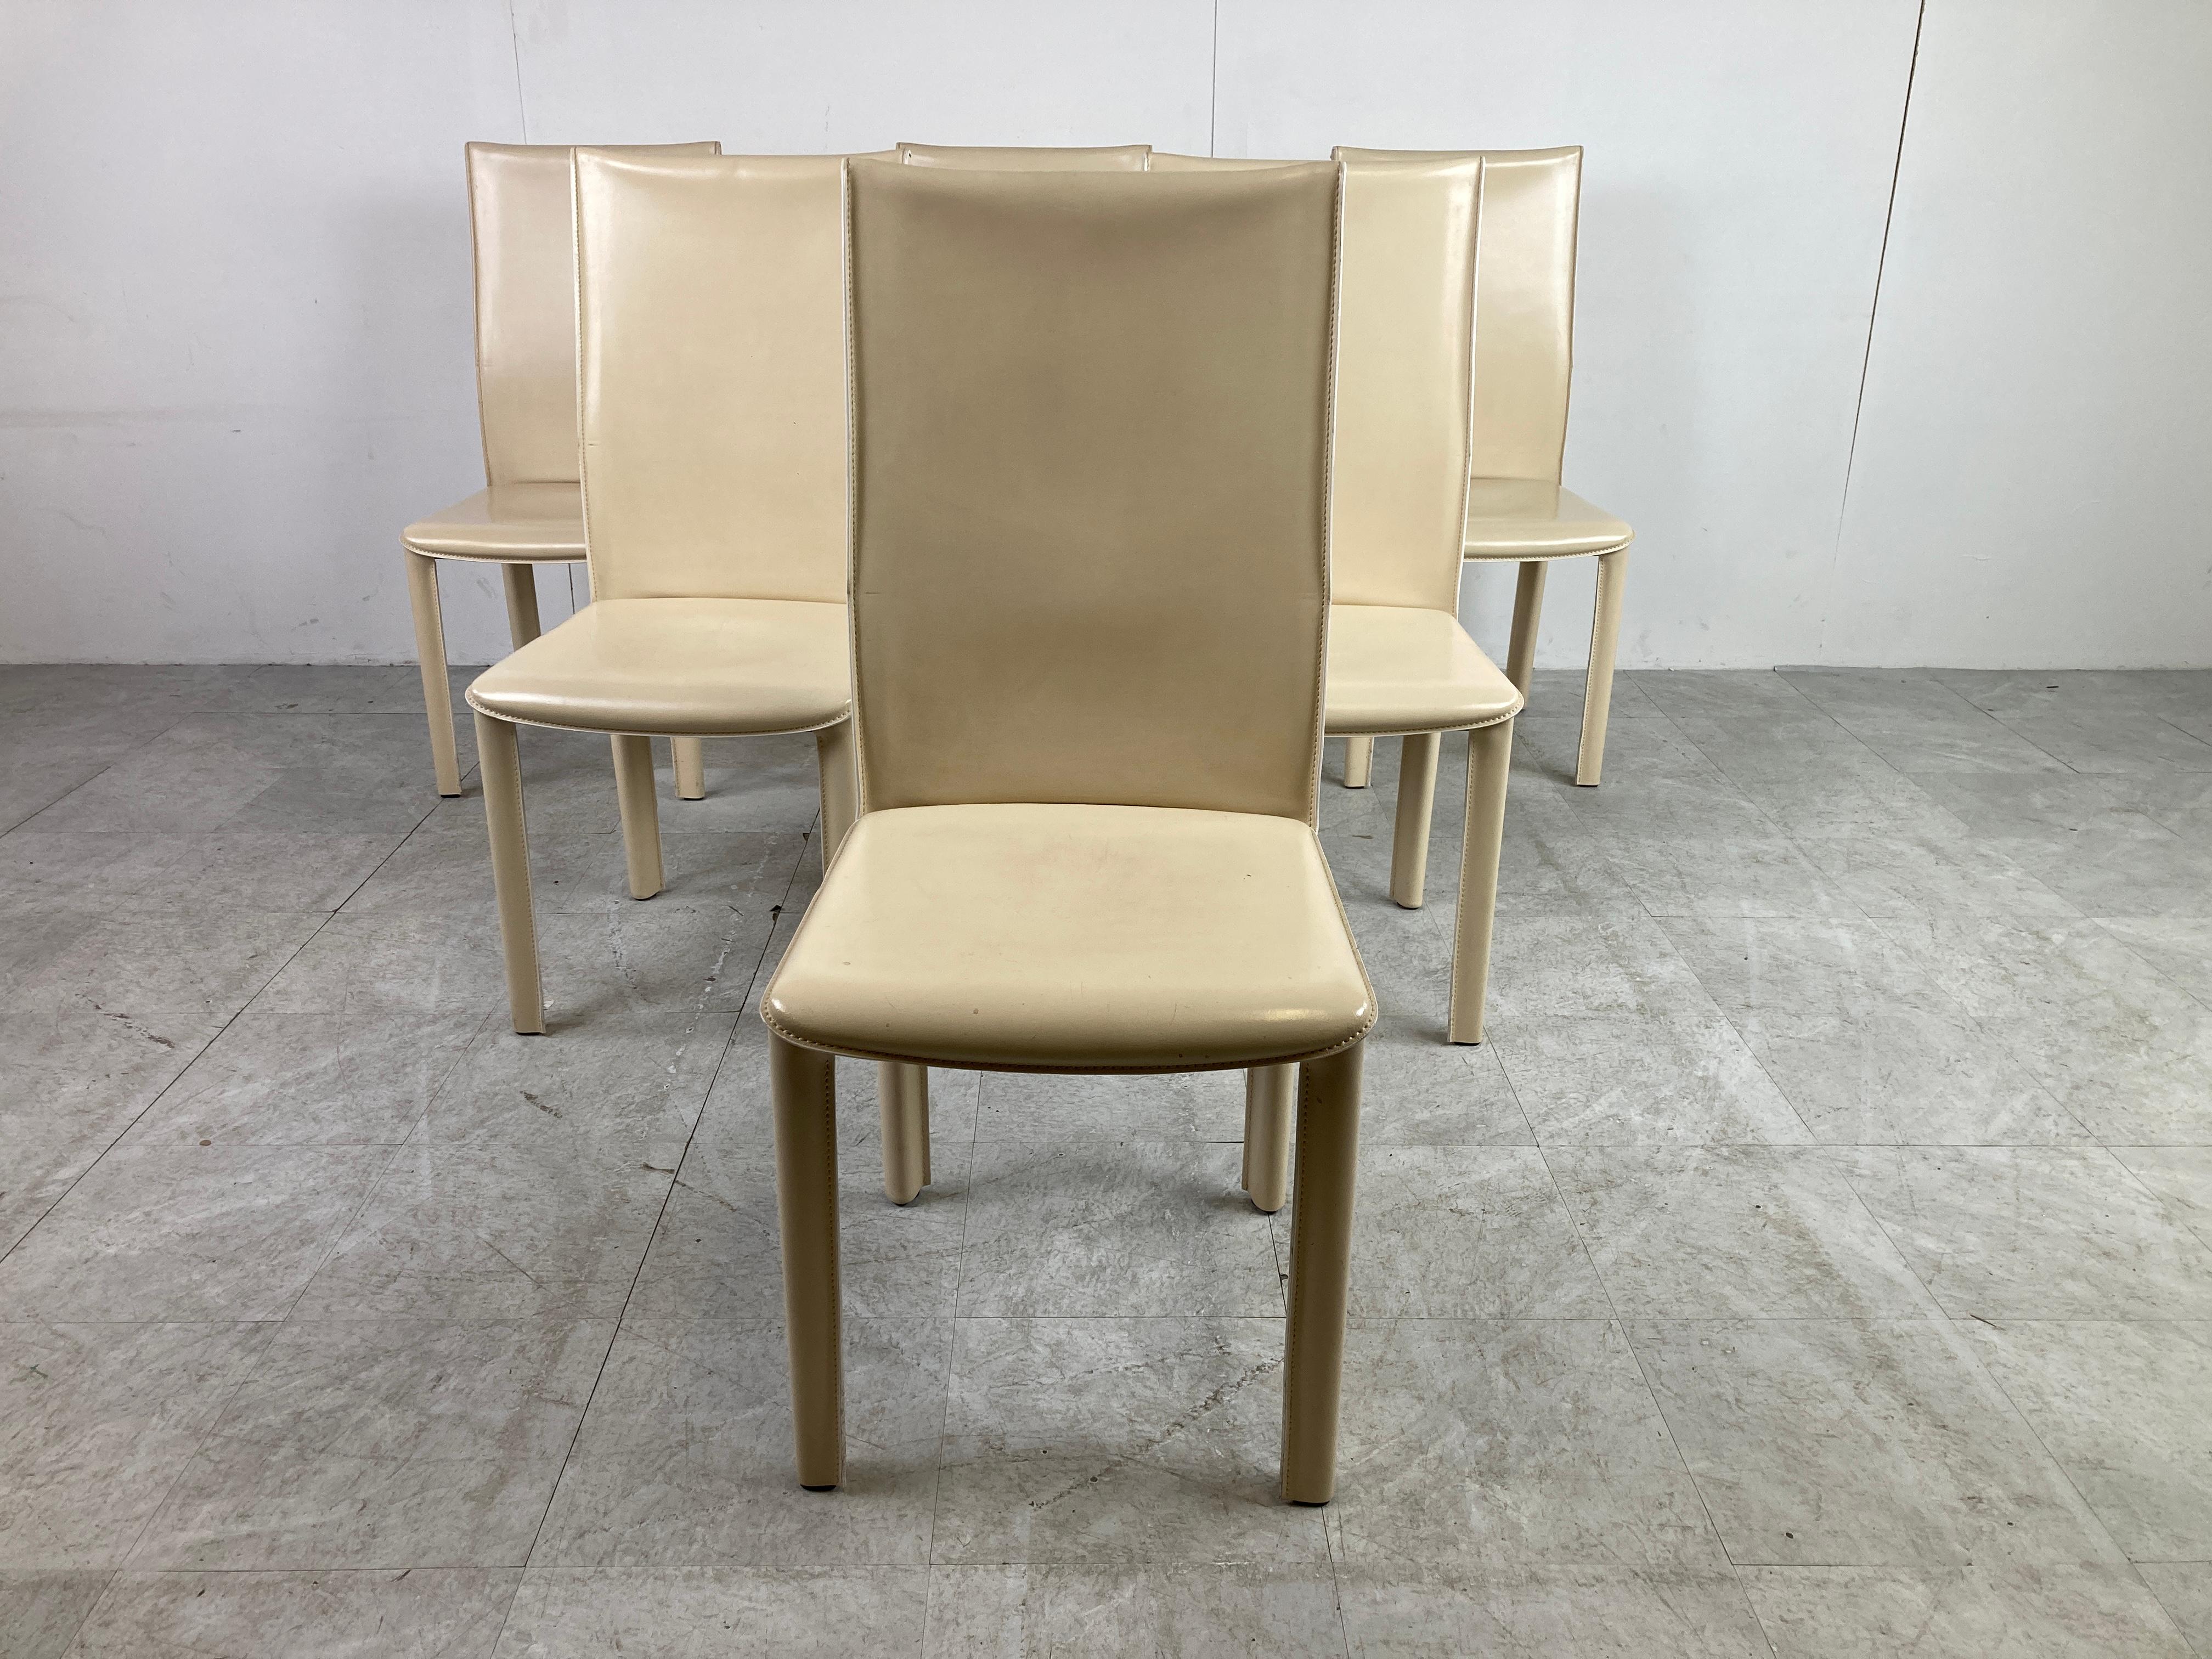 Italian Vintage Dining Chairs by Arper Italy, 1980s For Sale